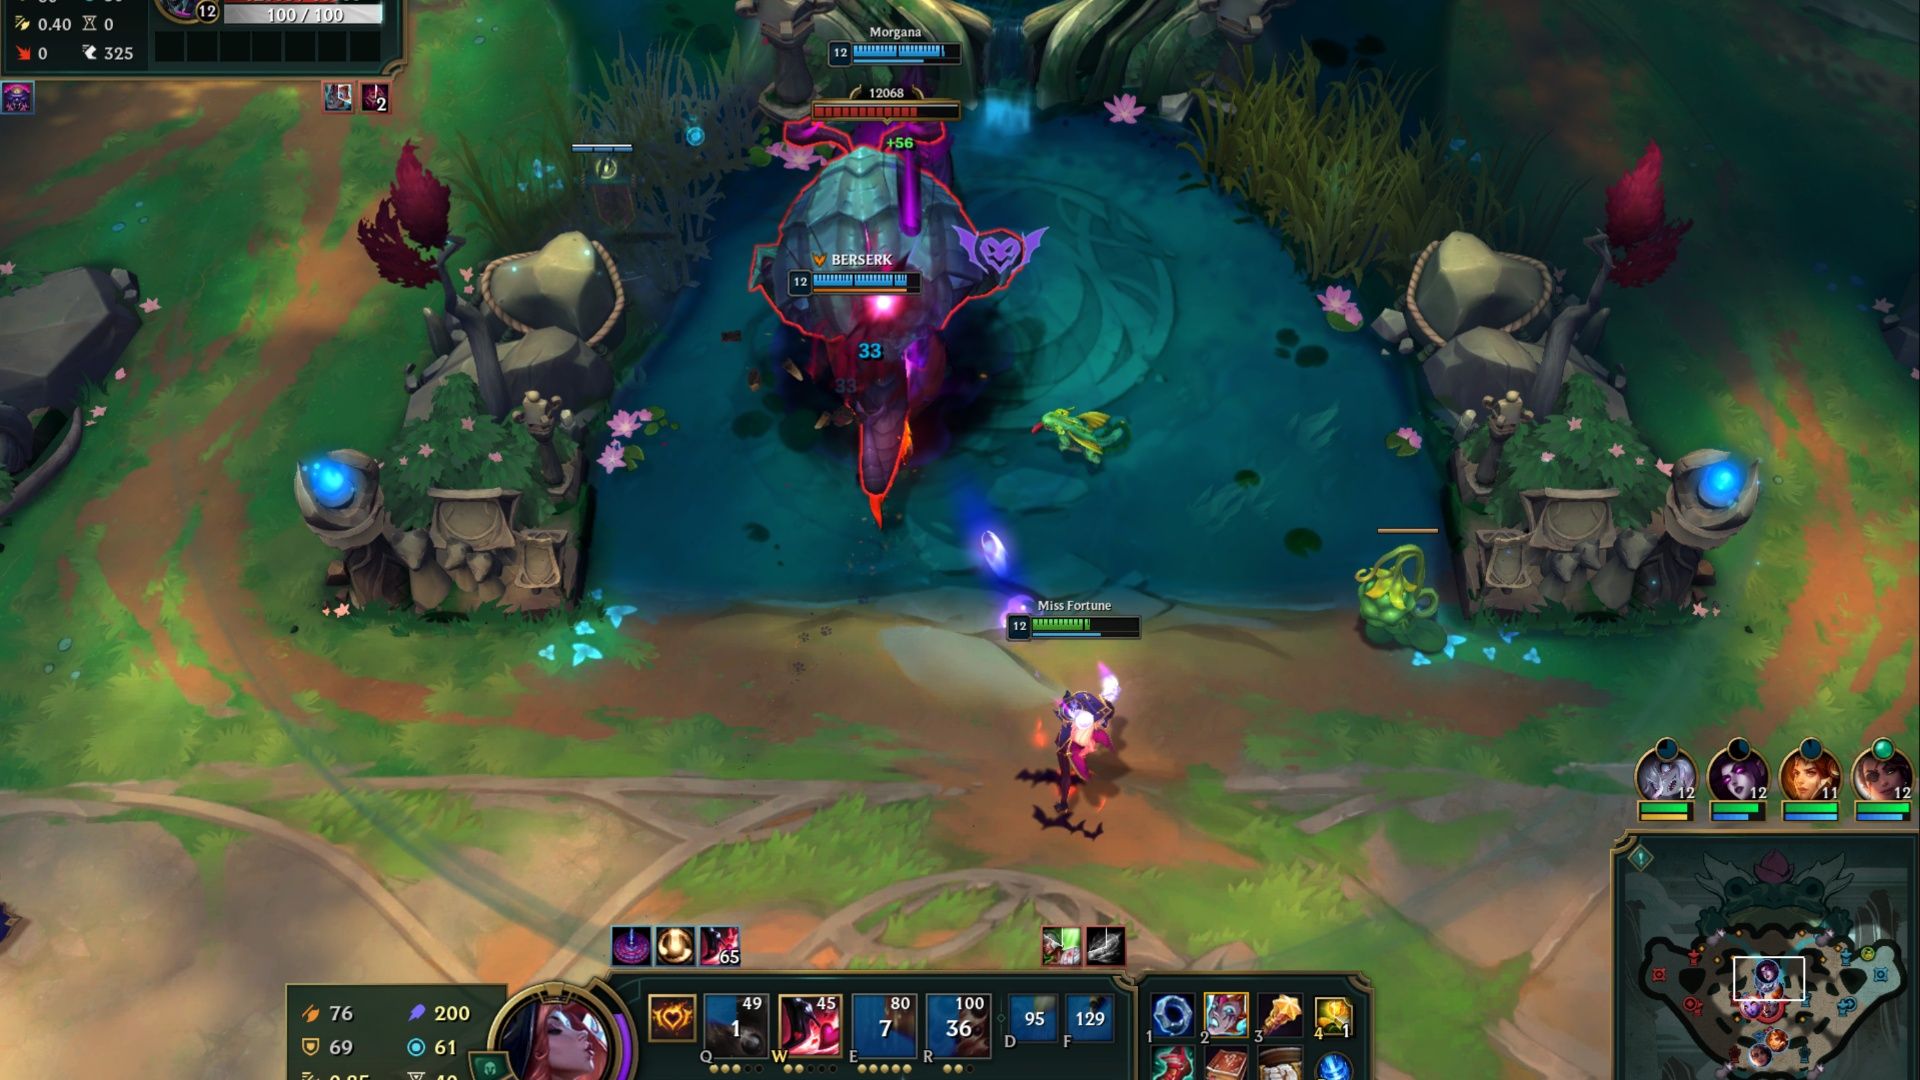 Miss Fortune, Briar, and Morgana attacking the Rift Herald during Nexus Blitz in League Of Legends.